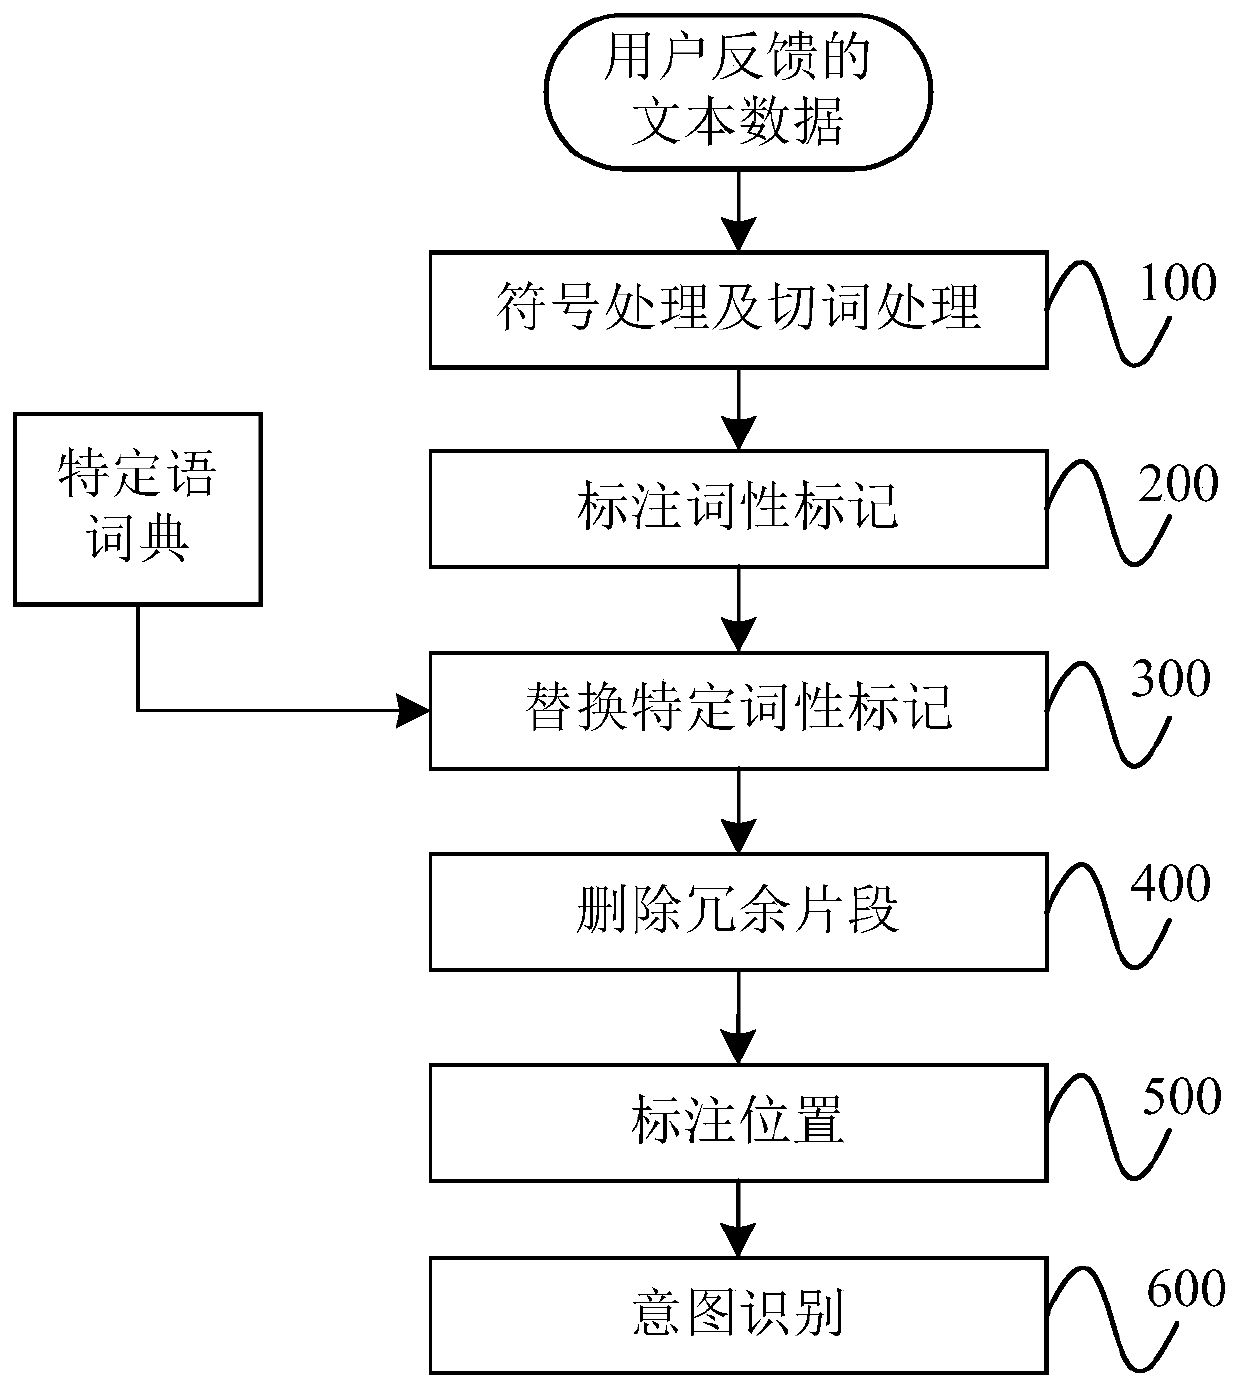 Intention recognition method and device